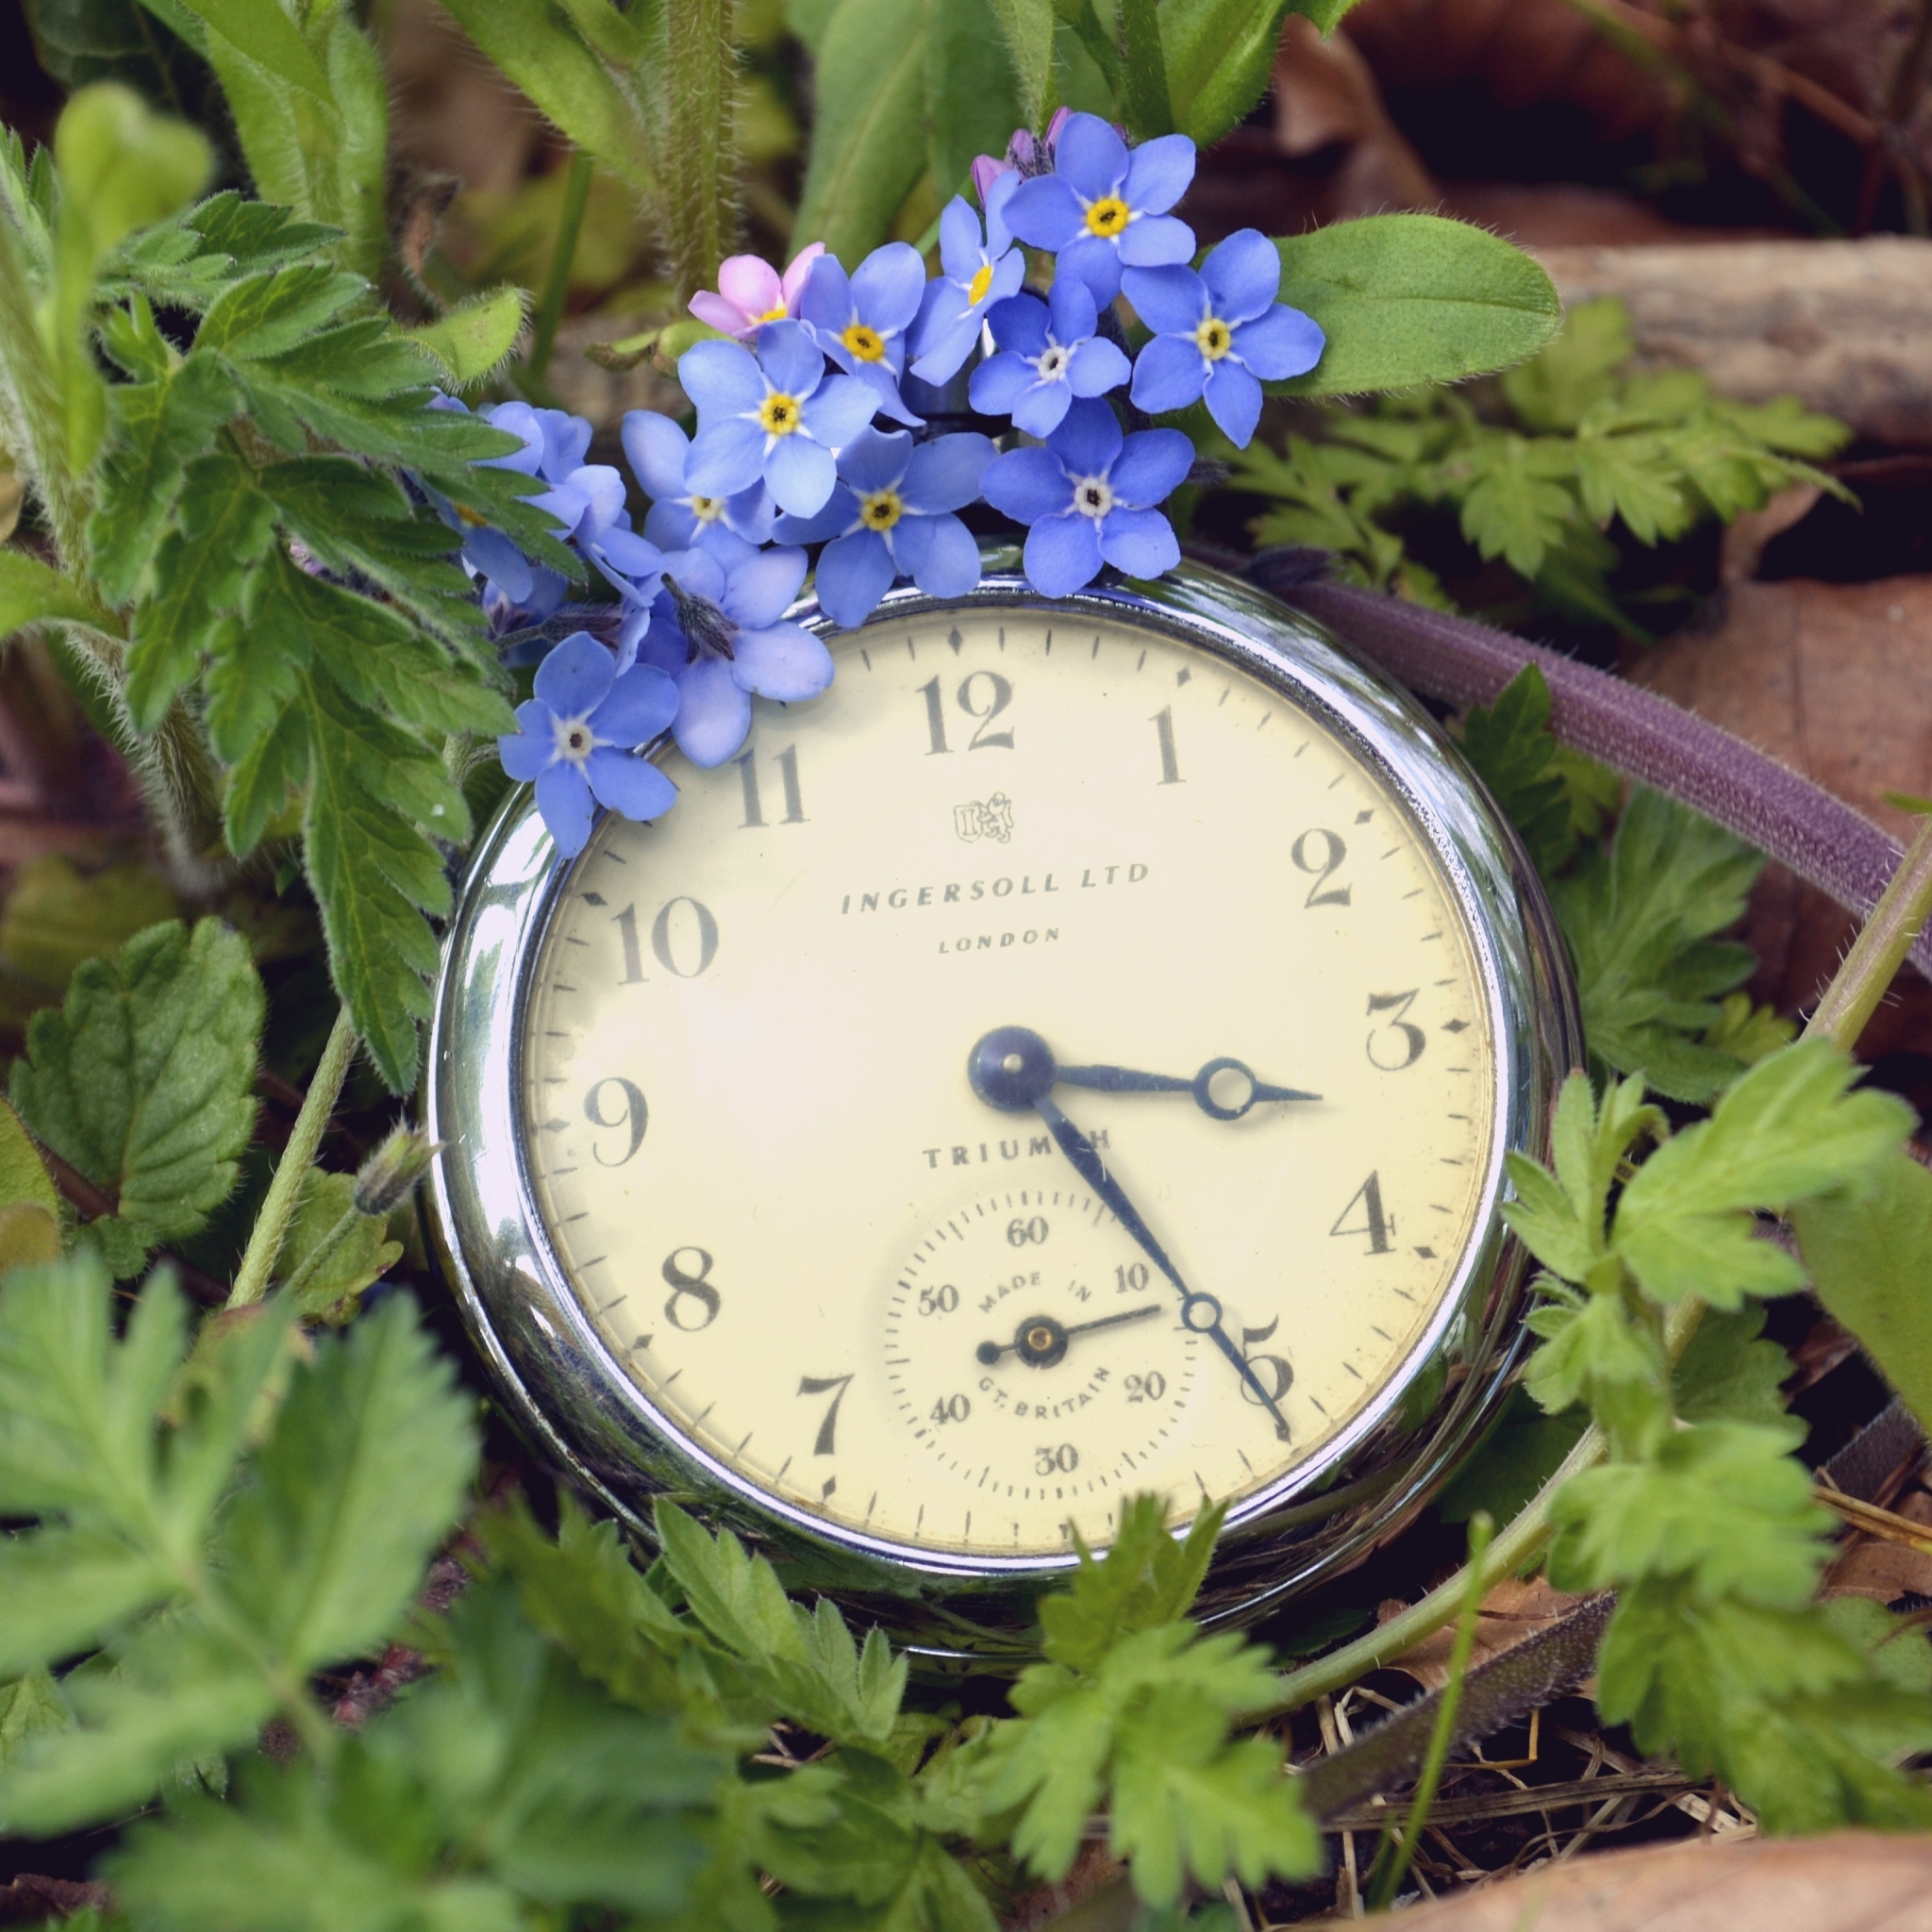 Vintage Watch And Little Blue Flowers wallpaper 2048x2048